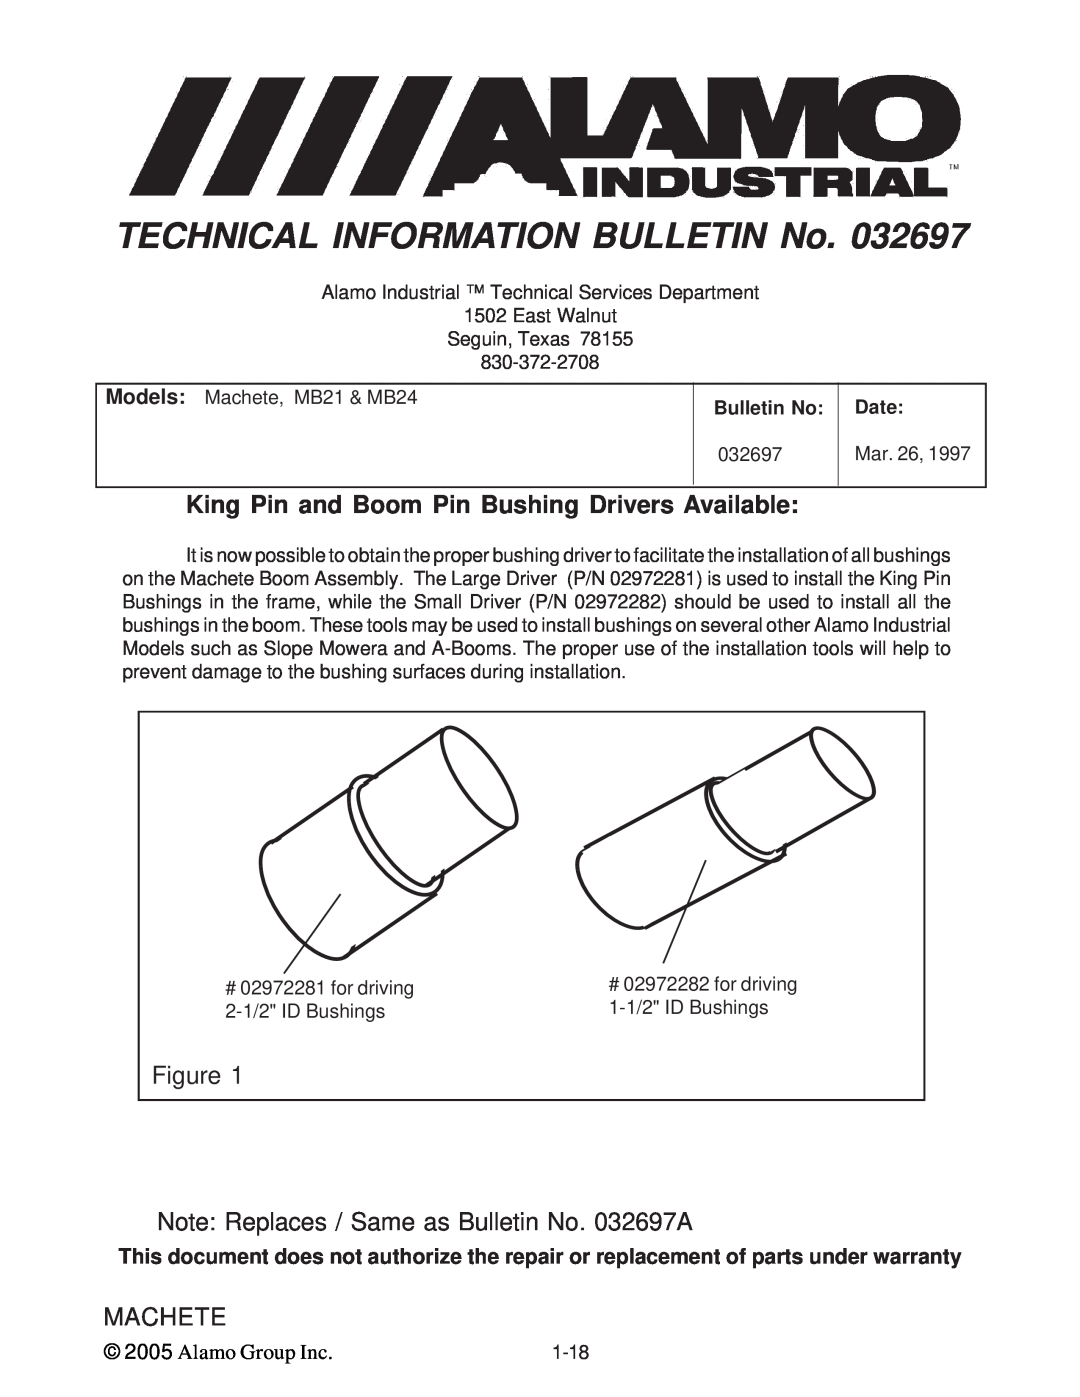 Alamo T 7740 King Pin and Boom Pin Bushing Drivers Available, Note: Replaces / Same as Bulletin No. 032697A, Figure, Date 